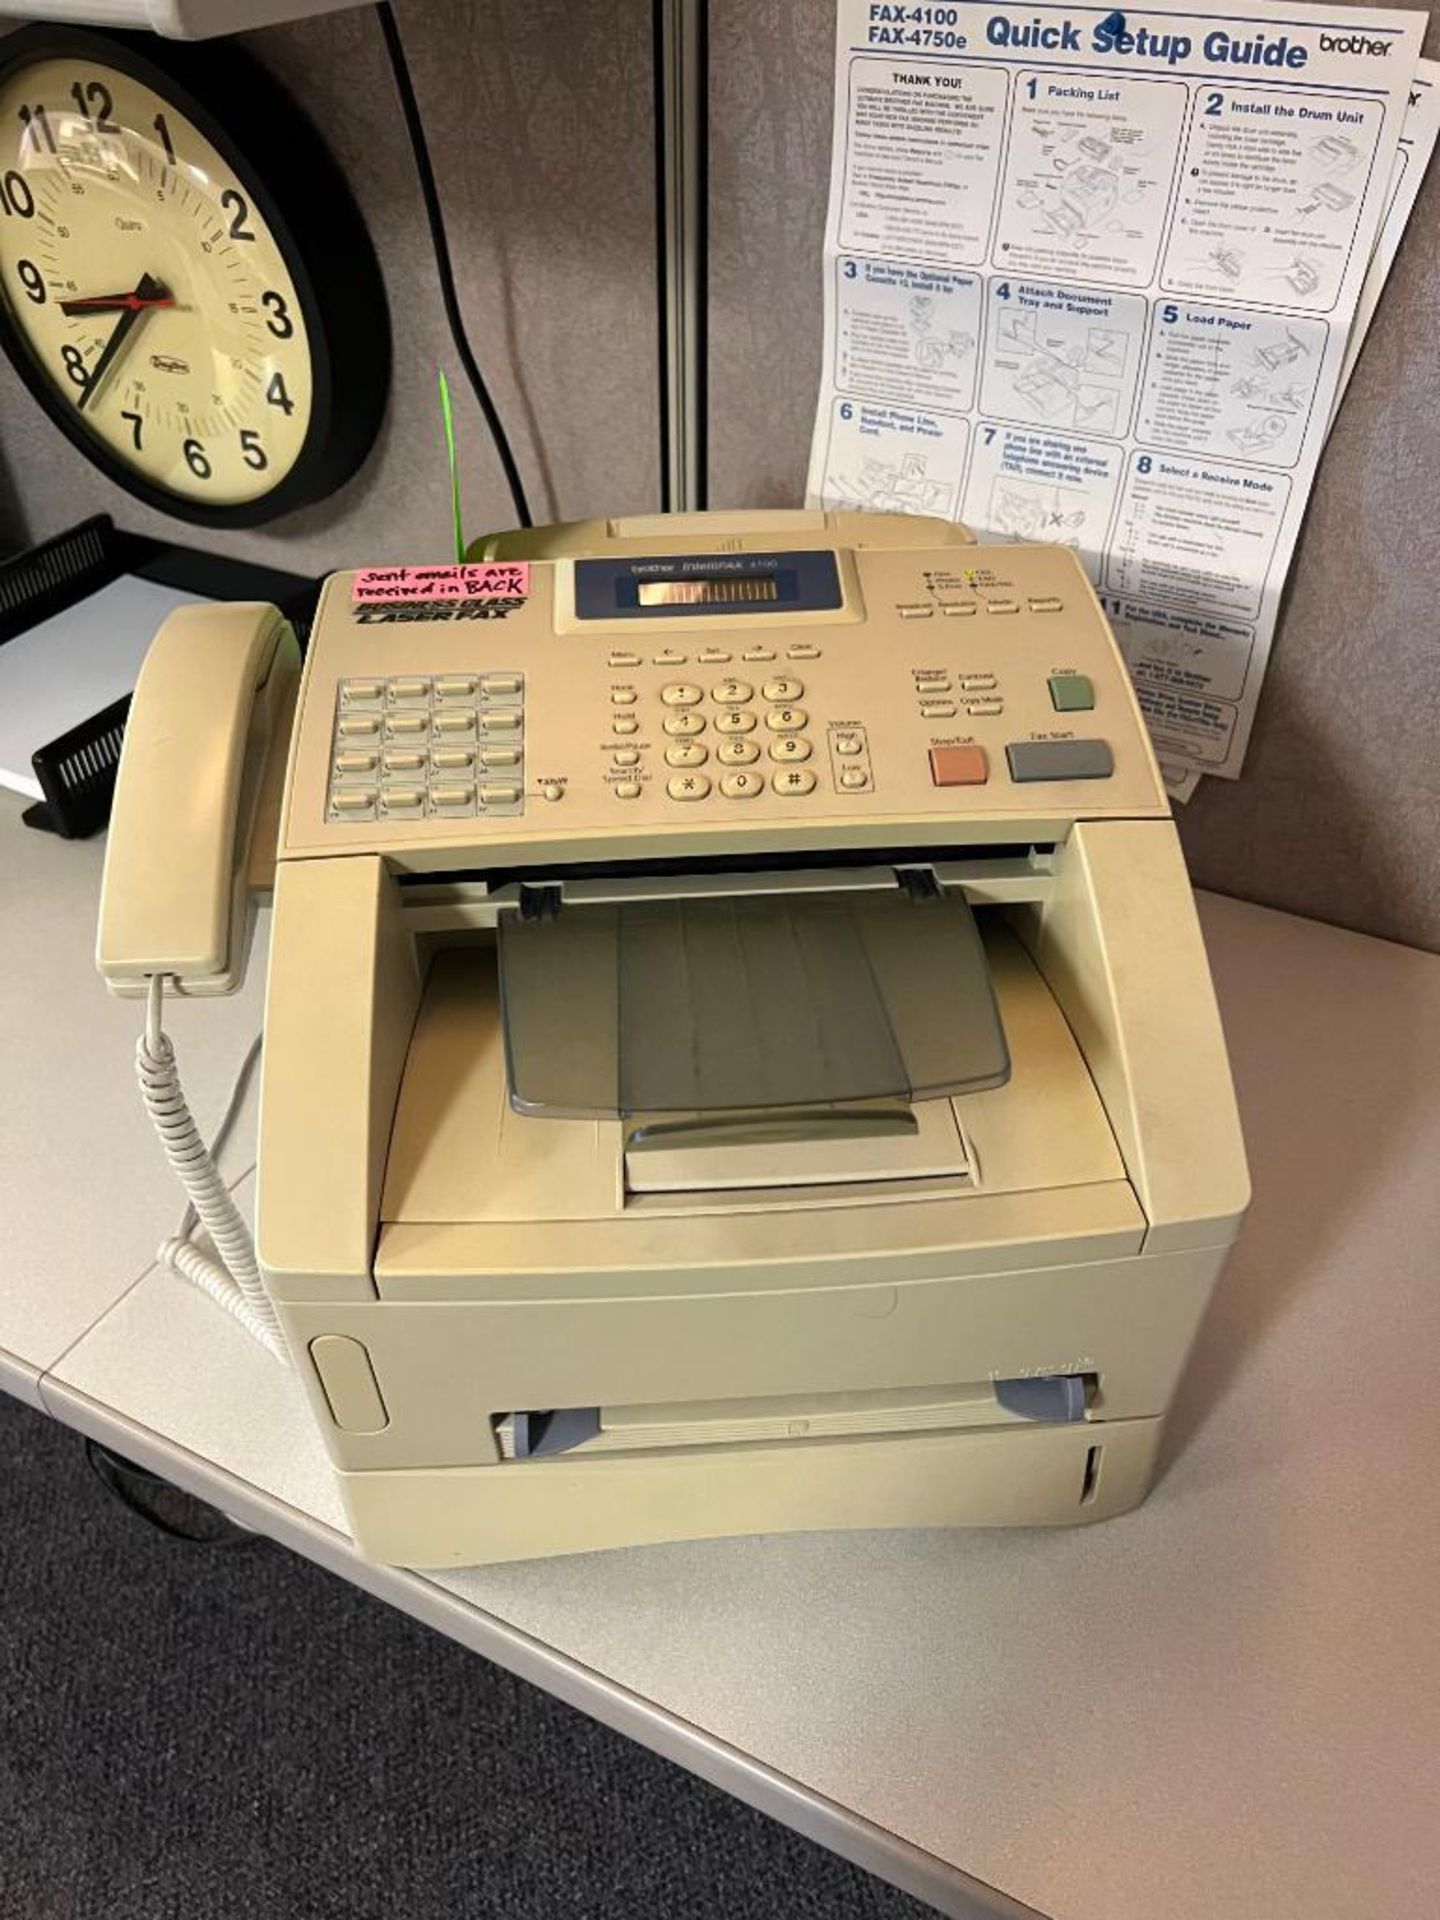 Brother Model Intellifax 4100 Fax Machine - Image 3 of 3